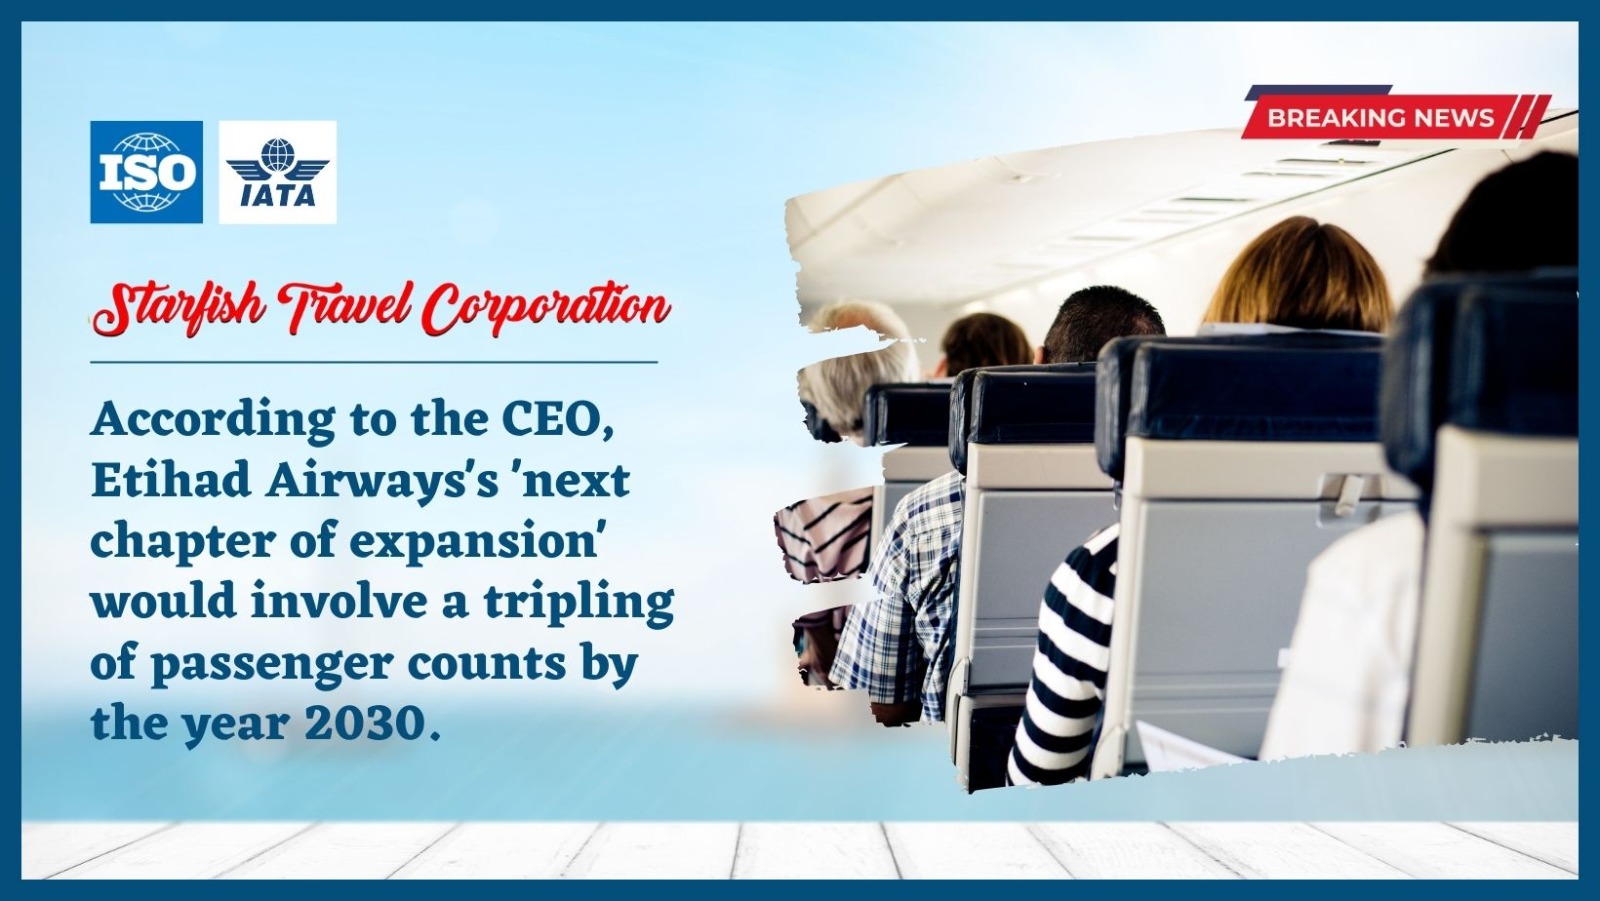 According to the CEO, Etihad Airways's 'next chapter of expansion' would involve a tripling of passenger counts by the year 2030.